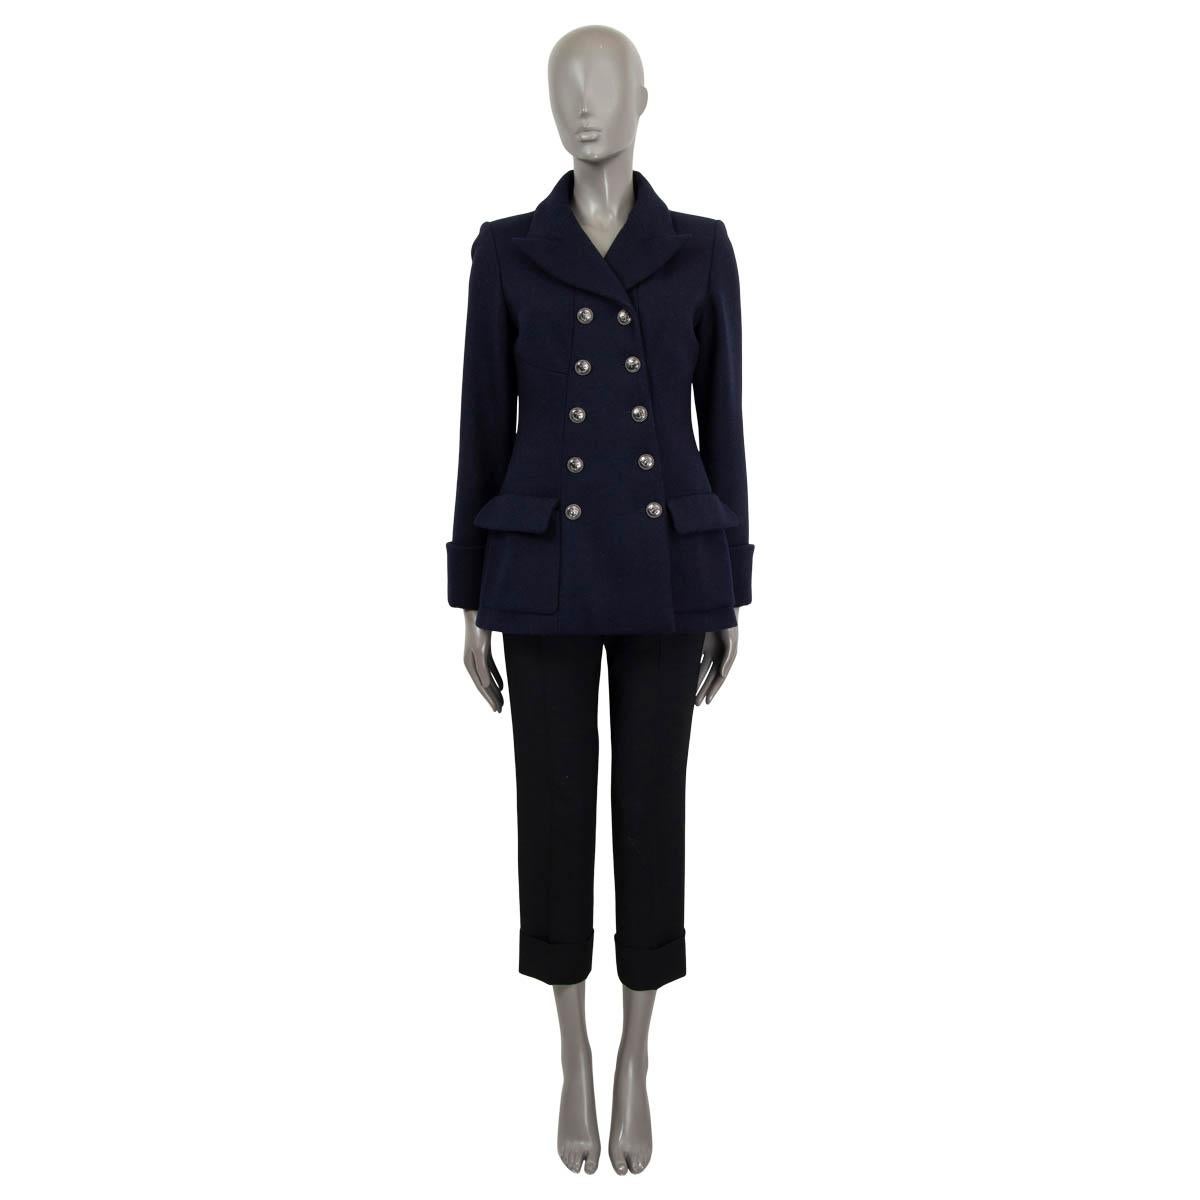 100% authentic Chanel peacoat in navy blue wool (100%). Features a back belt, two front flap pockets and folded cuffs. Opens with anchor embellished gunmetal buttons. Lined in navy blue silk (100%). Has been worn and is in excellent condition.